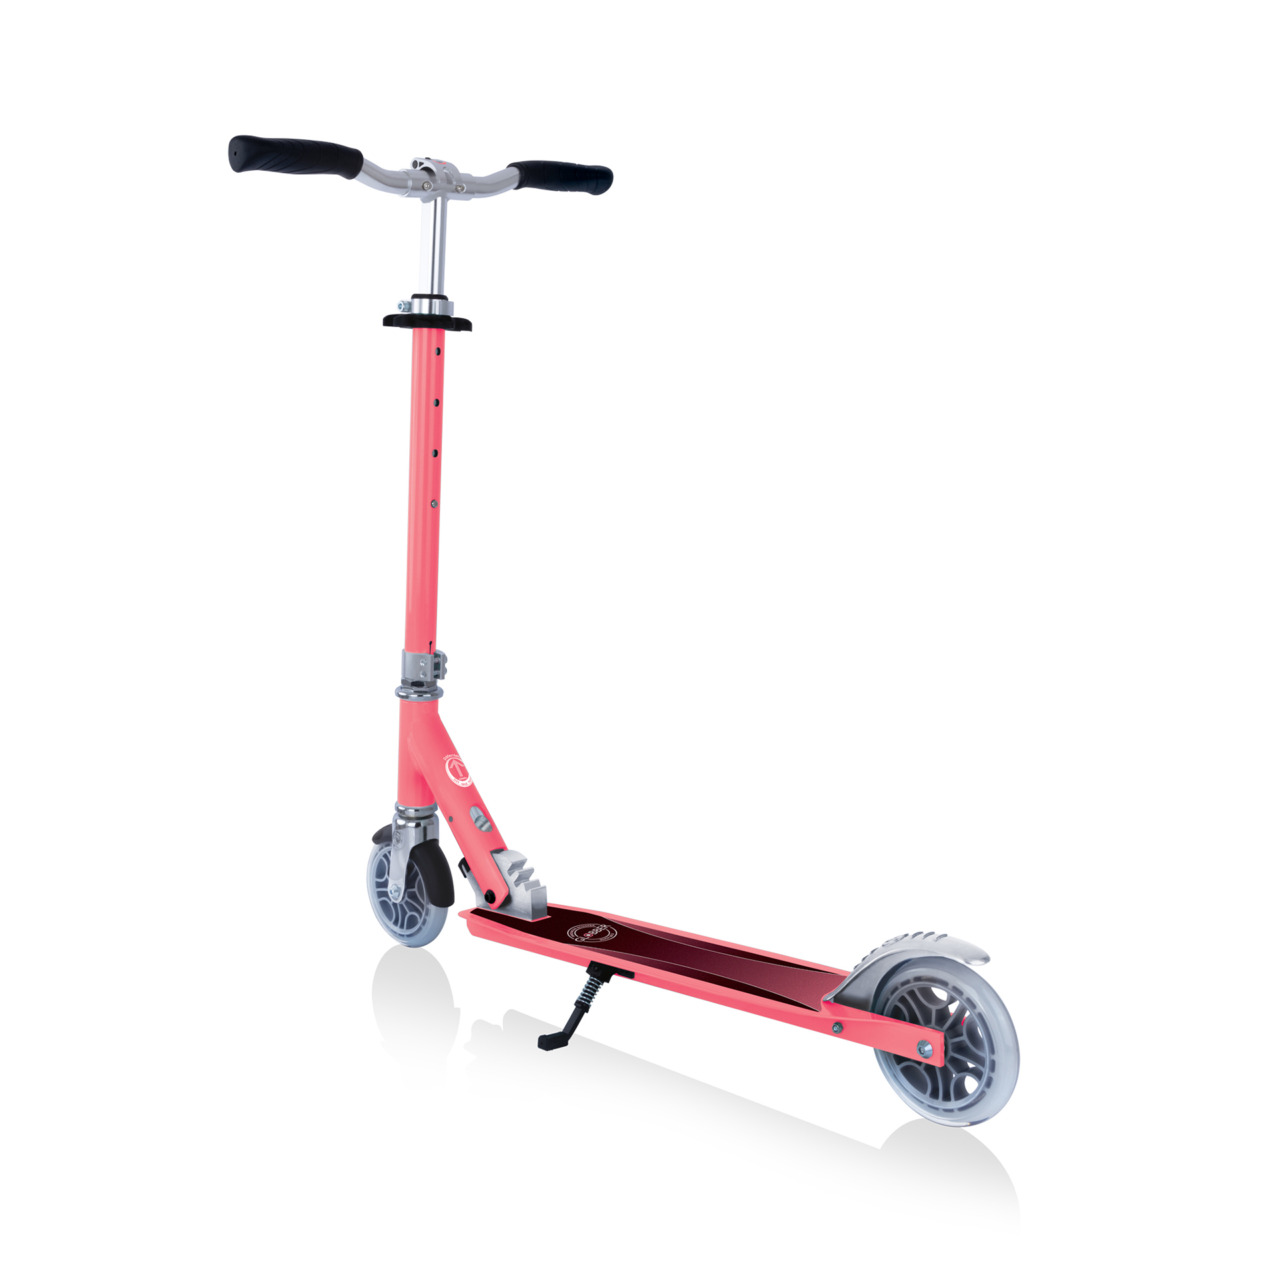 720 177 2 Wheel Fold Up Scooter